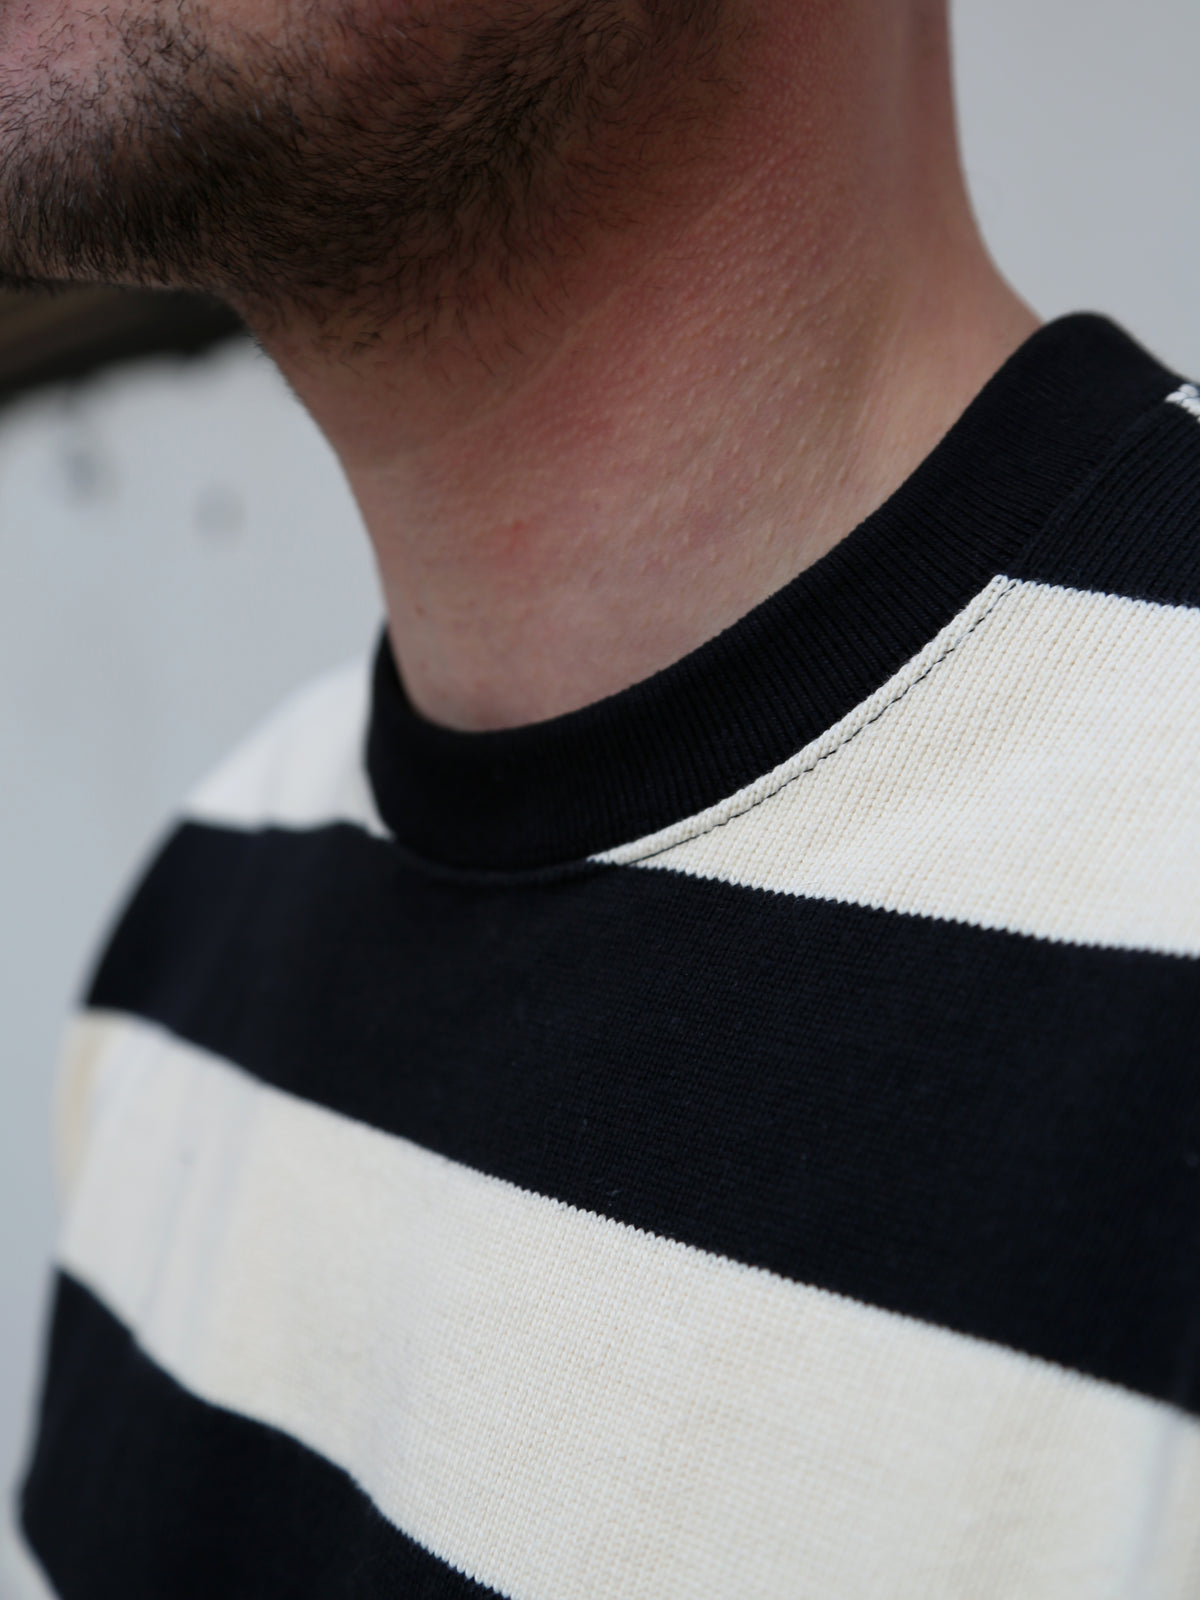 The Real McCoy's Buco Heavy Striped Jersey – Black'n'White (BC18104)